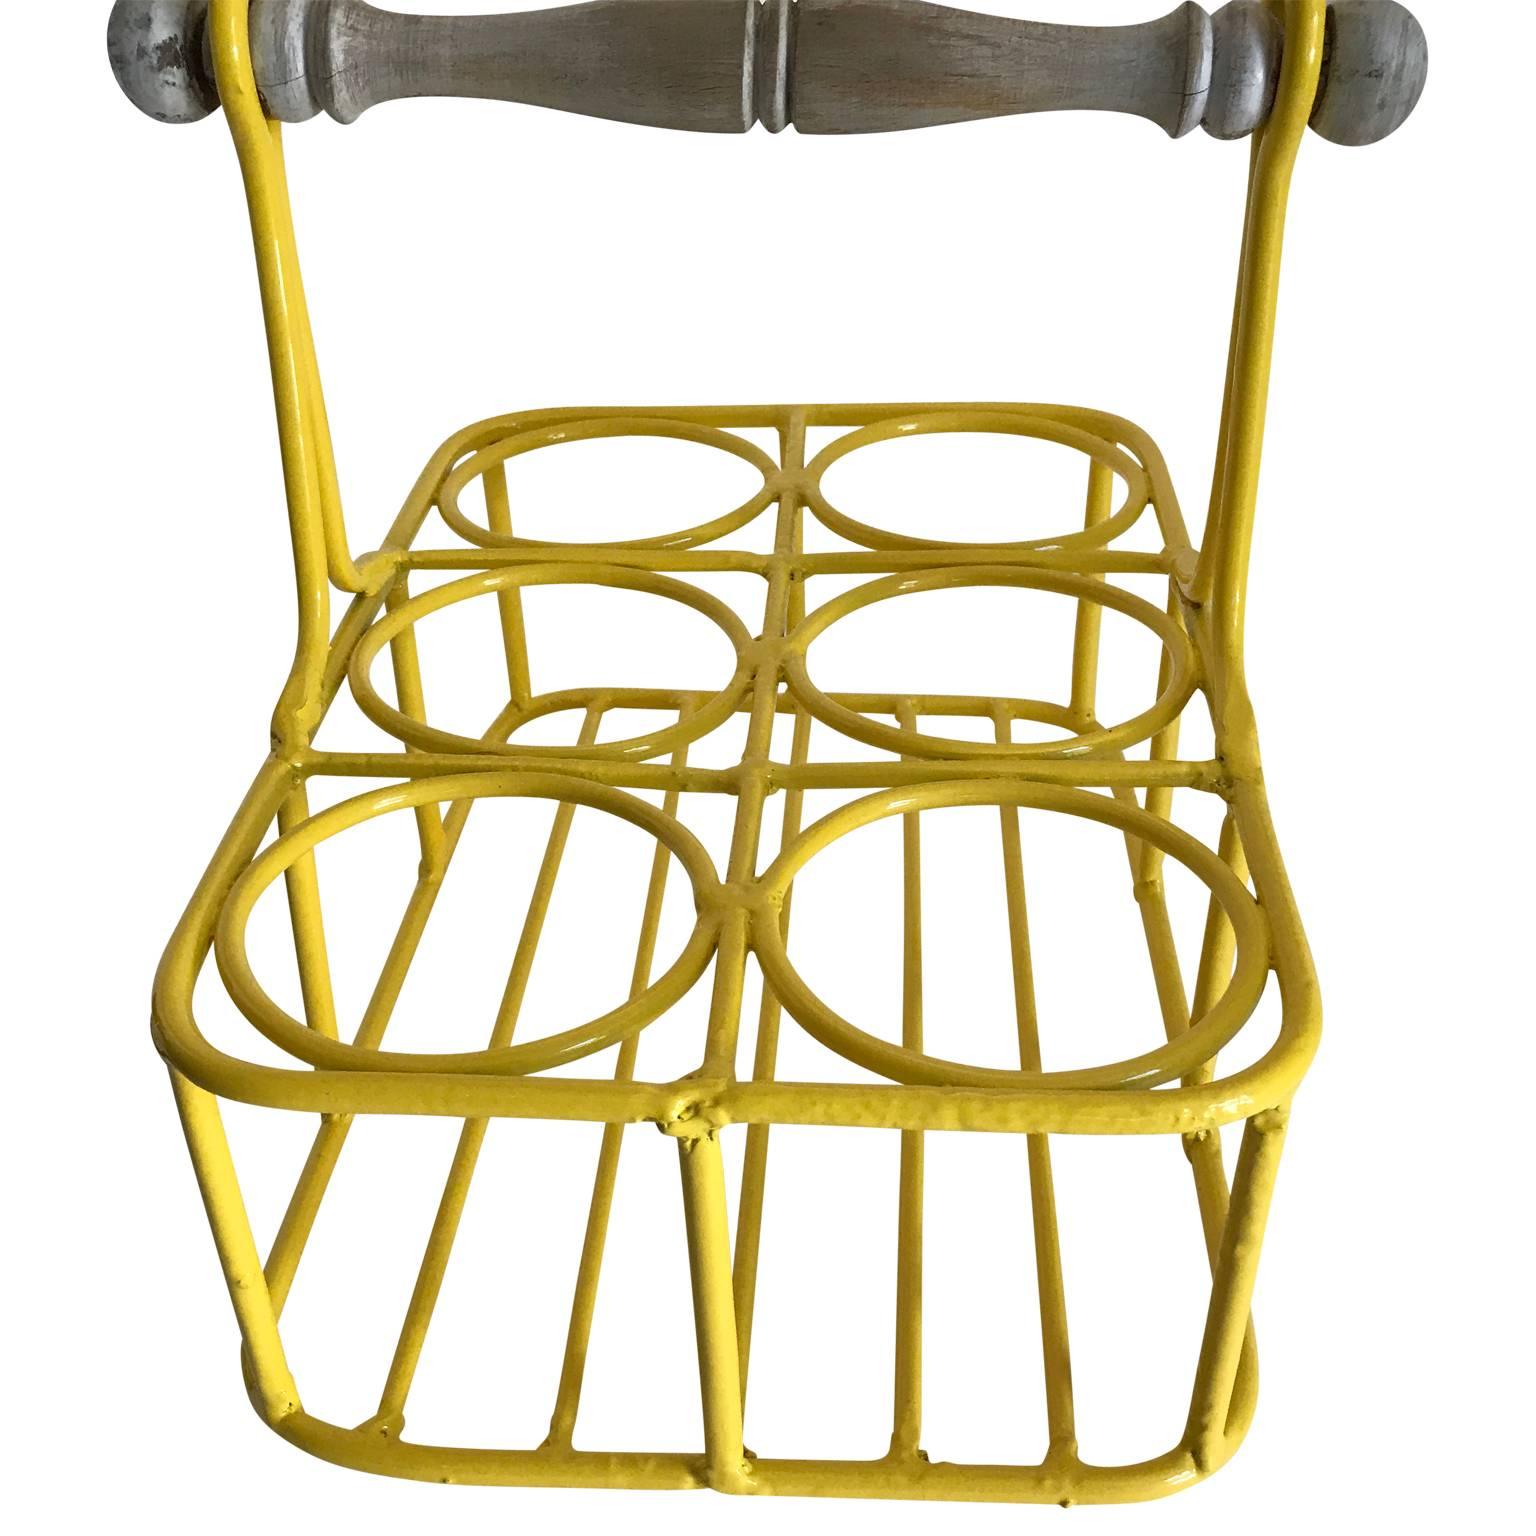 Iron Set of Two Wine Racks or Planters in Bright Sunshine Yellow